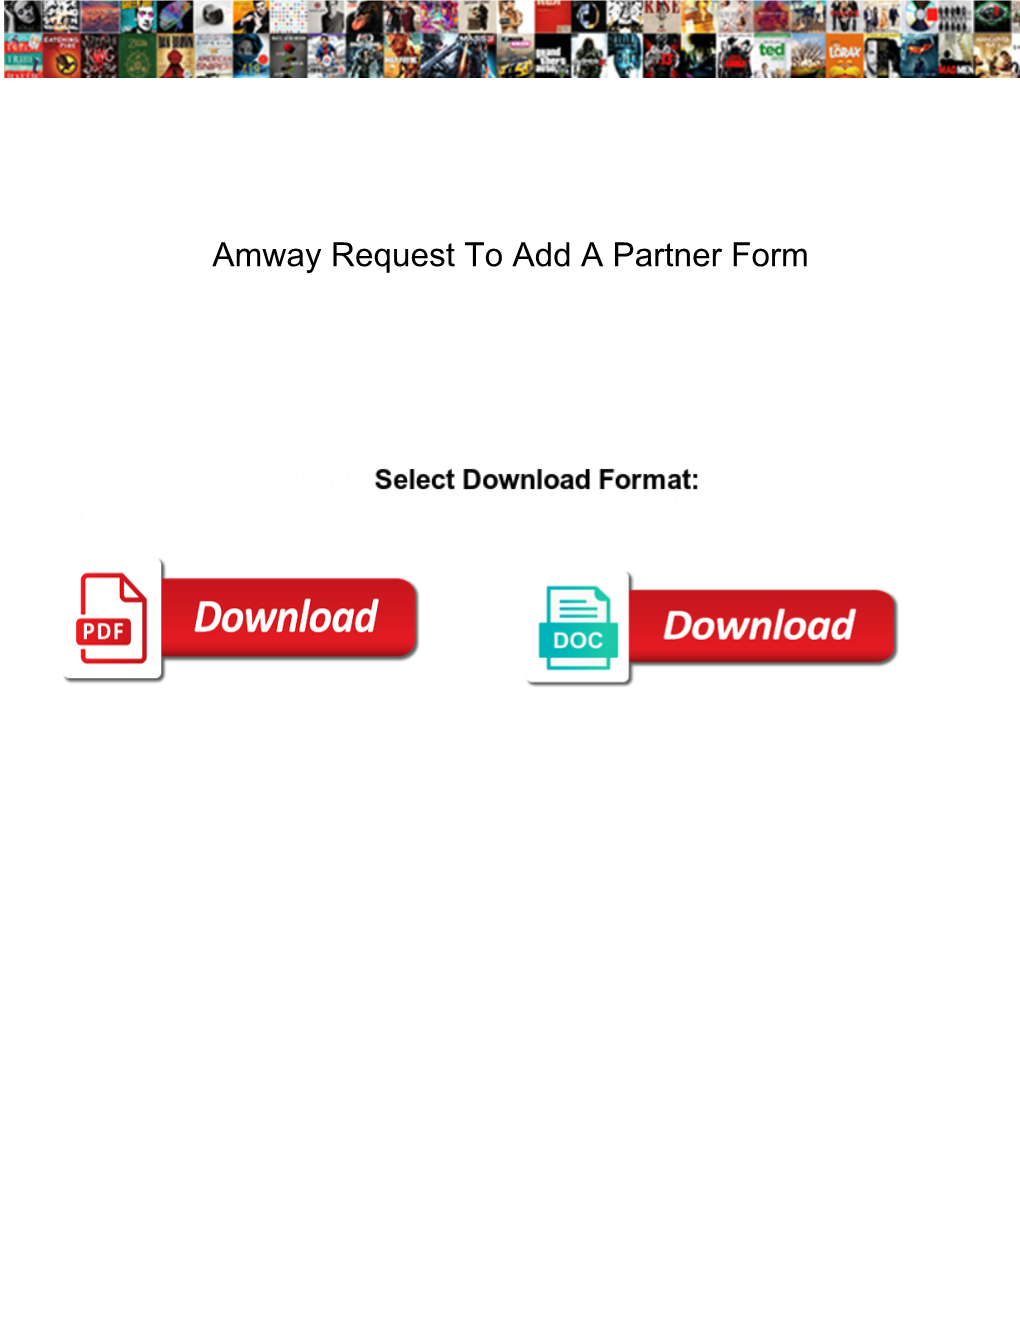 Amway Request to Add a Partner Form